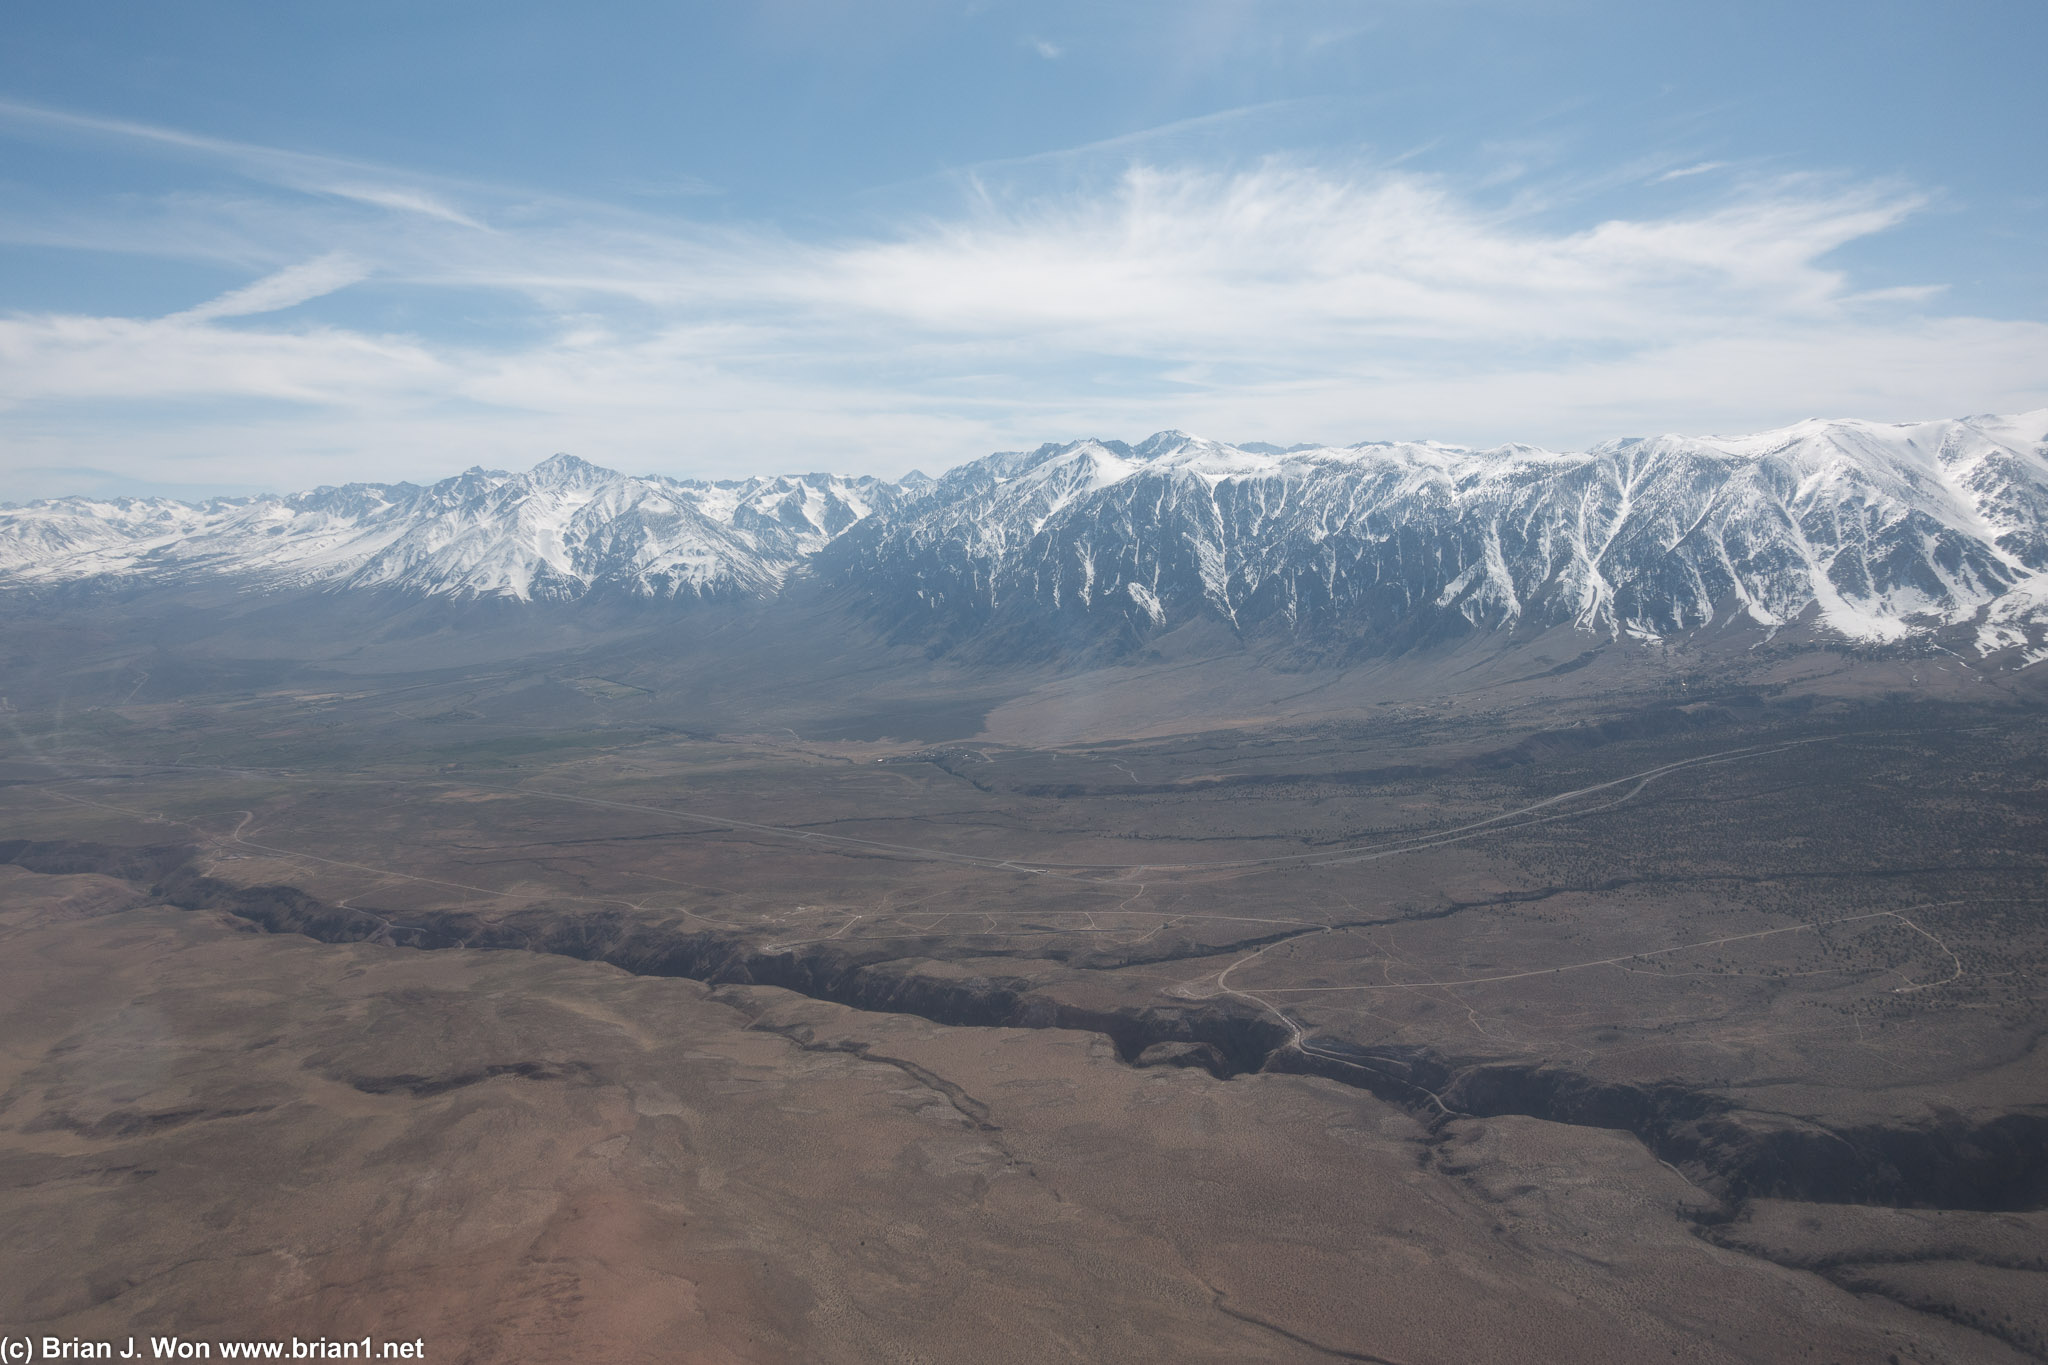 Owens River, US-395, and the Sierra Nevadas.